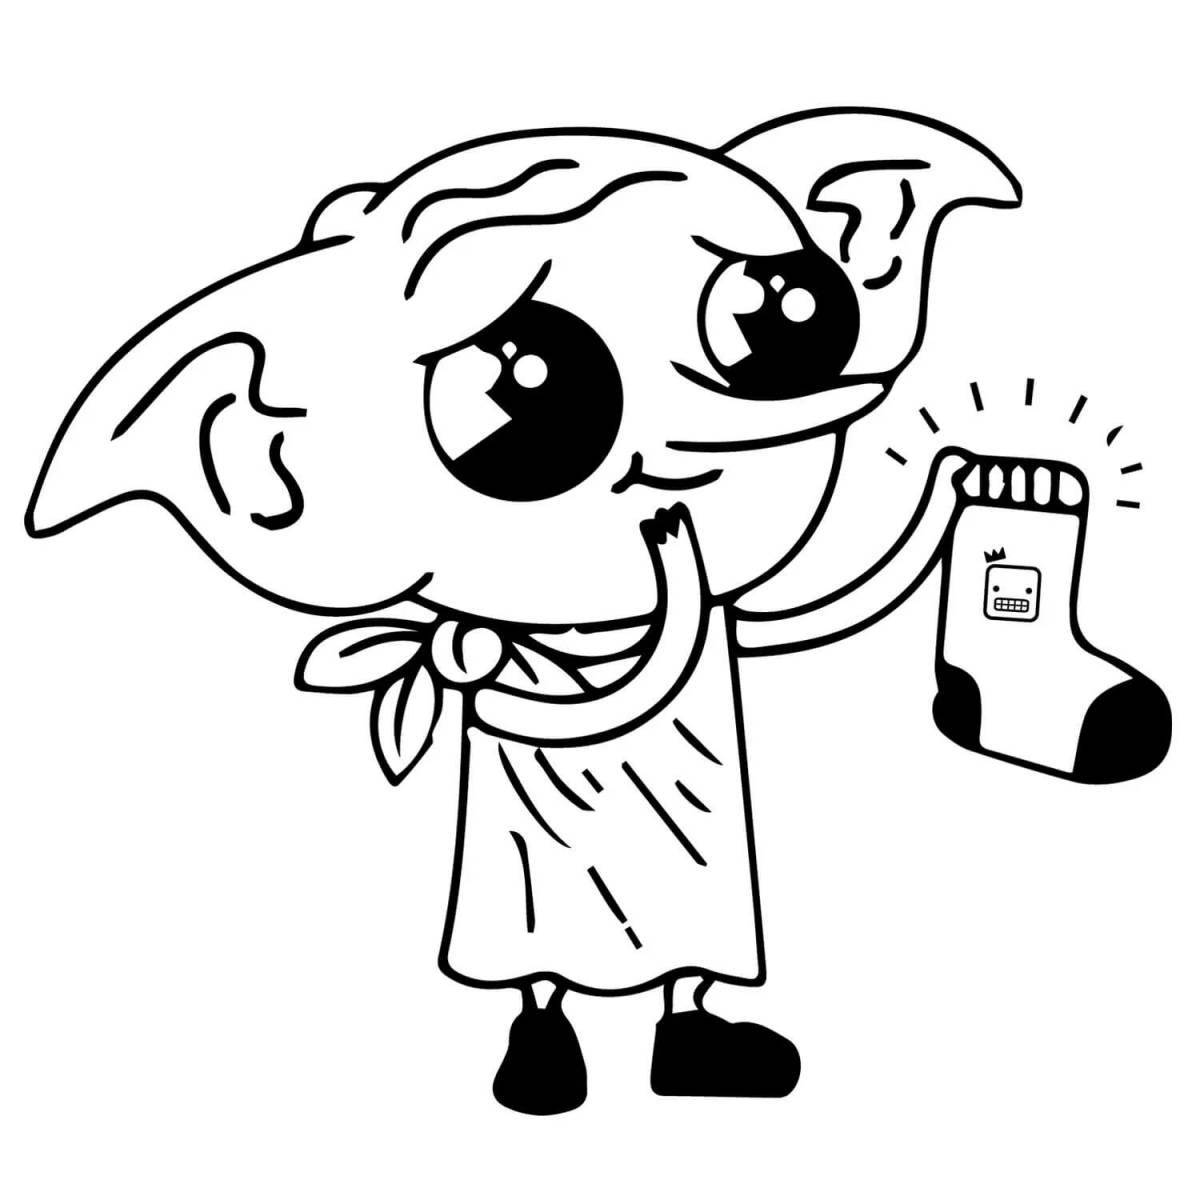 Dobby's adorable coloring book